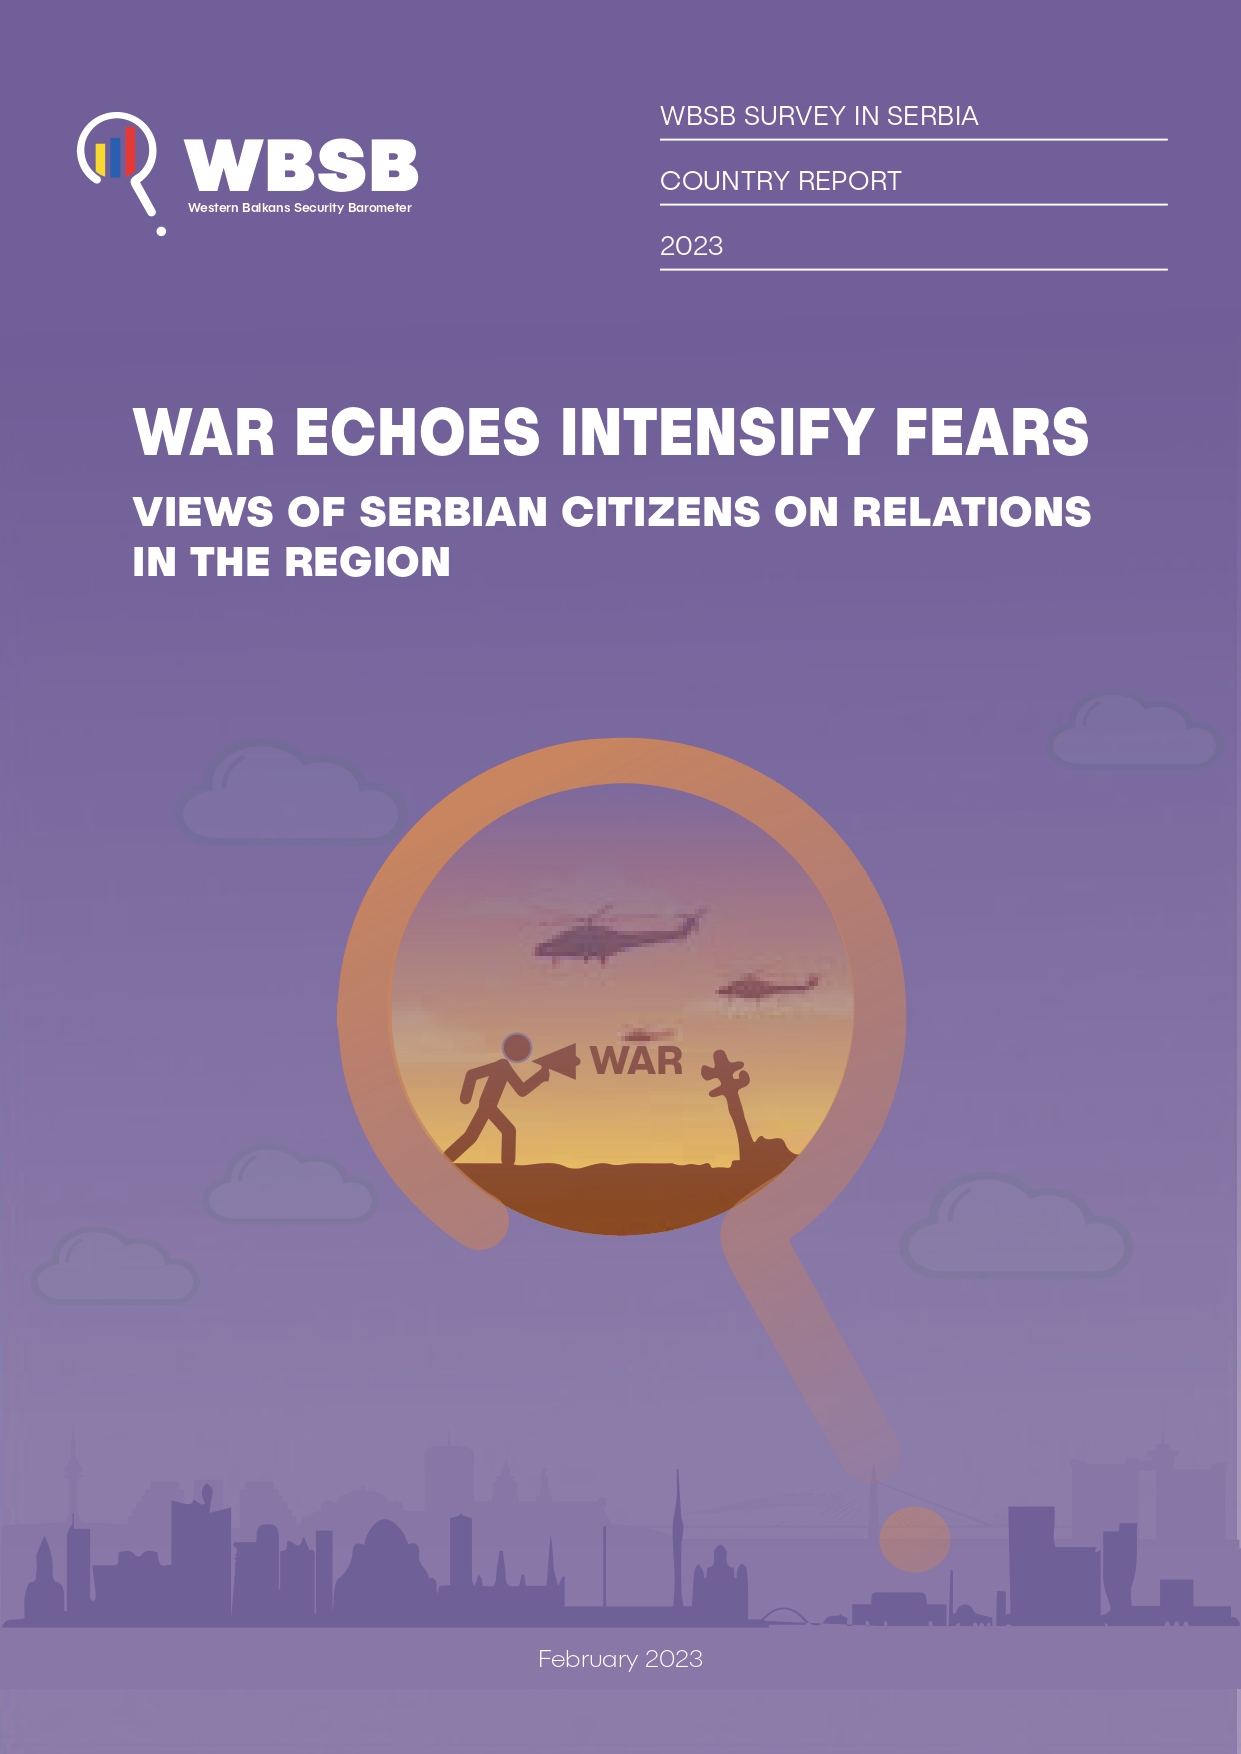 WAR ECHOES INTENSIFY FEARS: VIEWS OF SERBIAN CITIZENS ON RELATIONS IN THE REGION